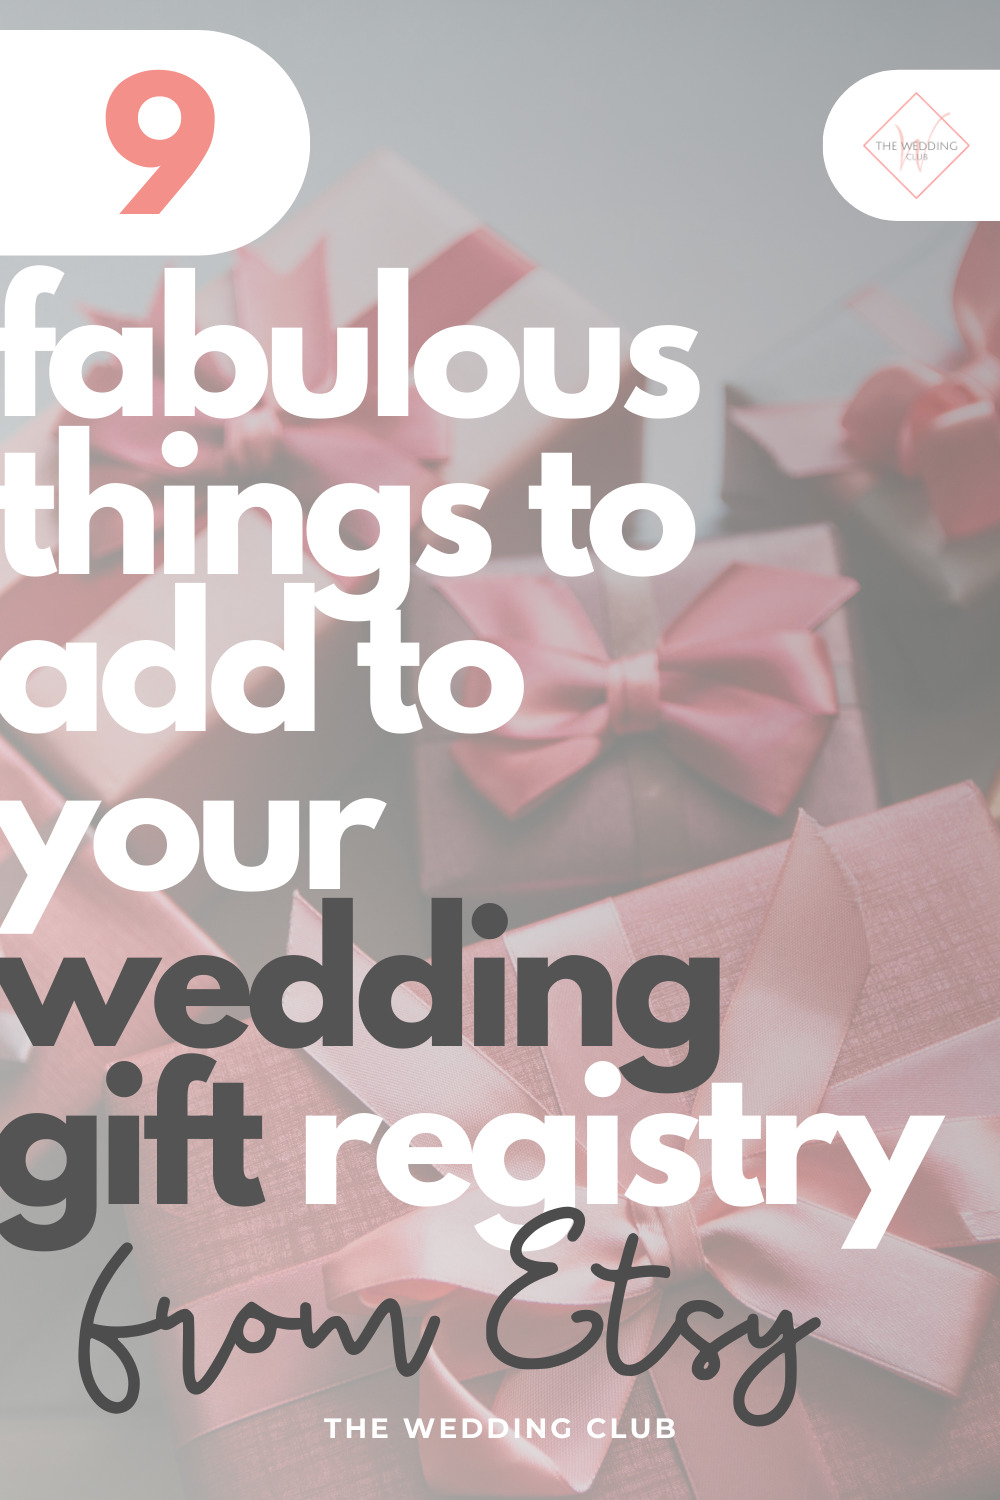 9 Fabulous things to add to your Wedding Gift Registry from Etsy